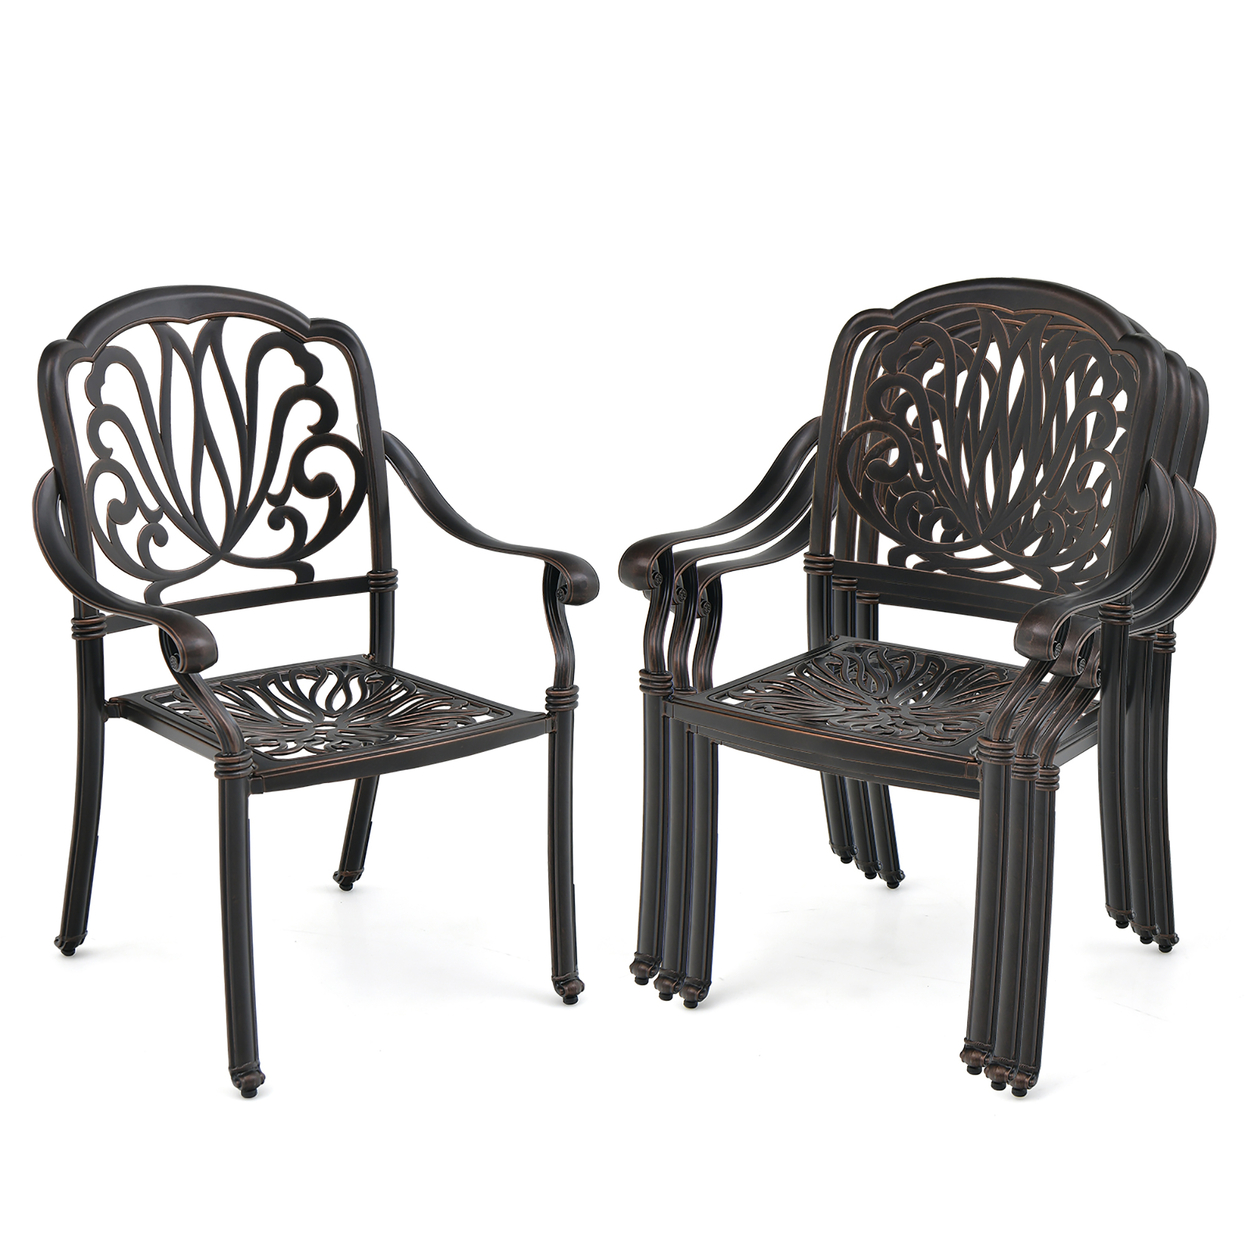 4 Pieces Cast Aluminum Chairs Set Of 2 Stackable Patio Dining Chairs W/ Armrests